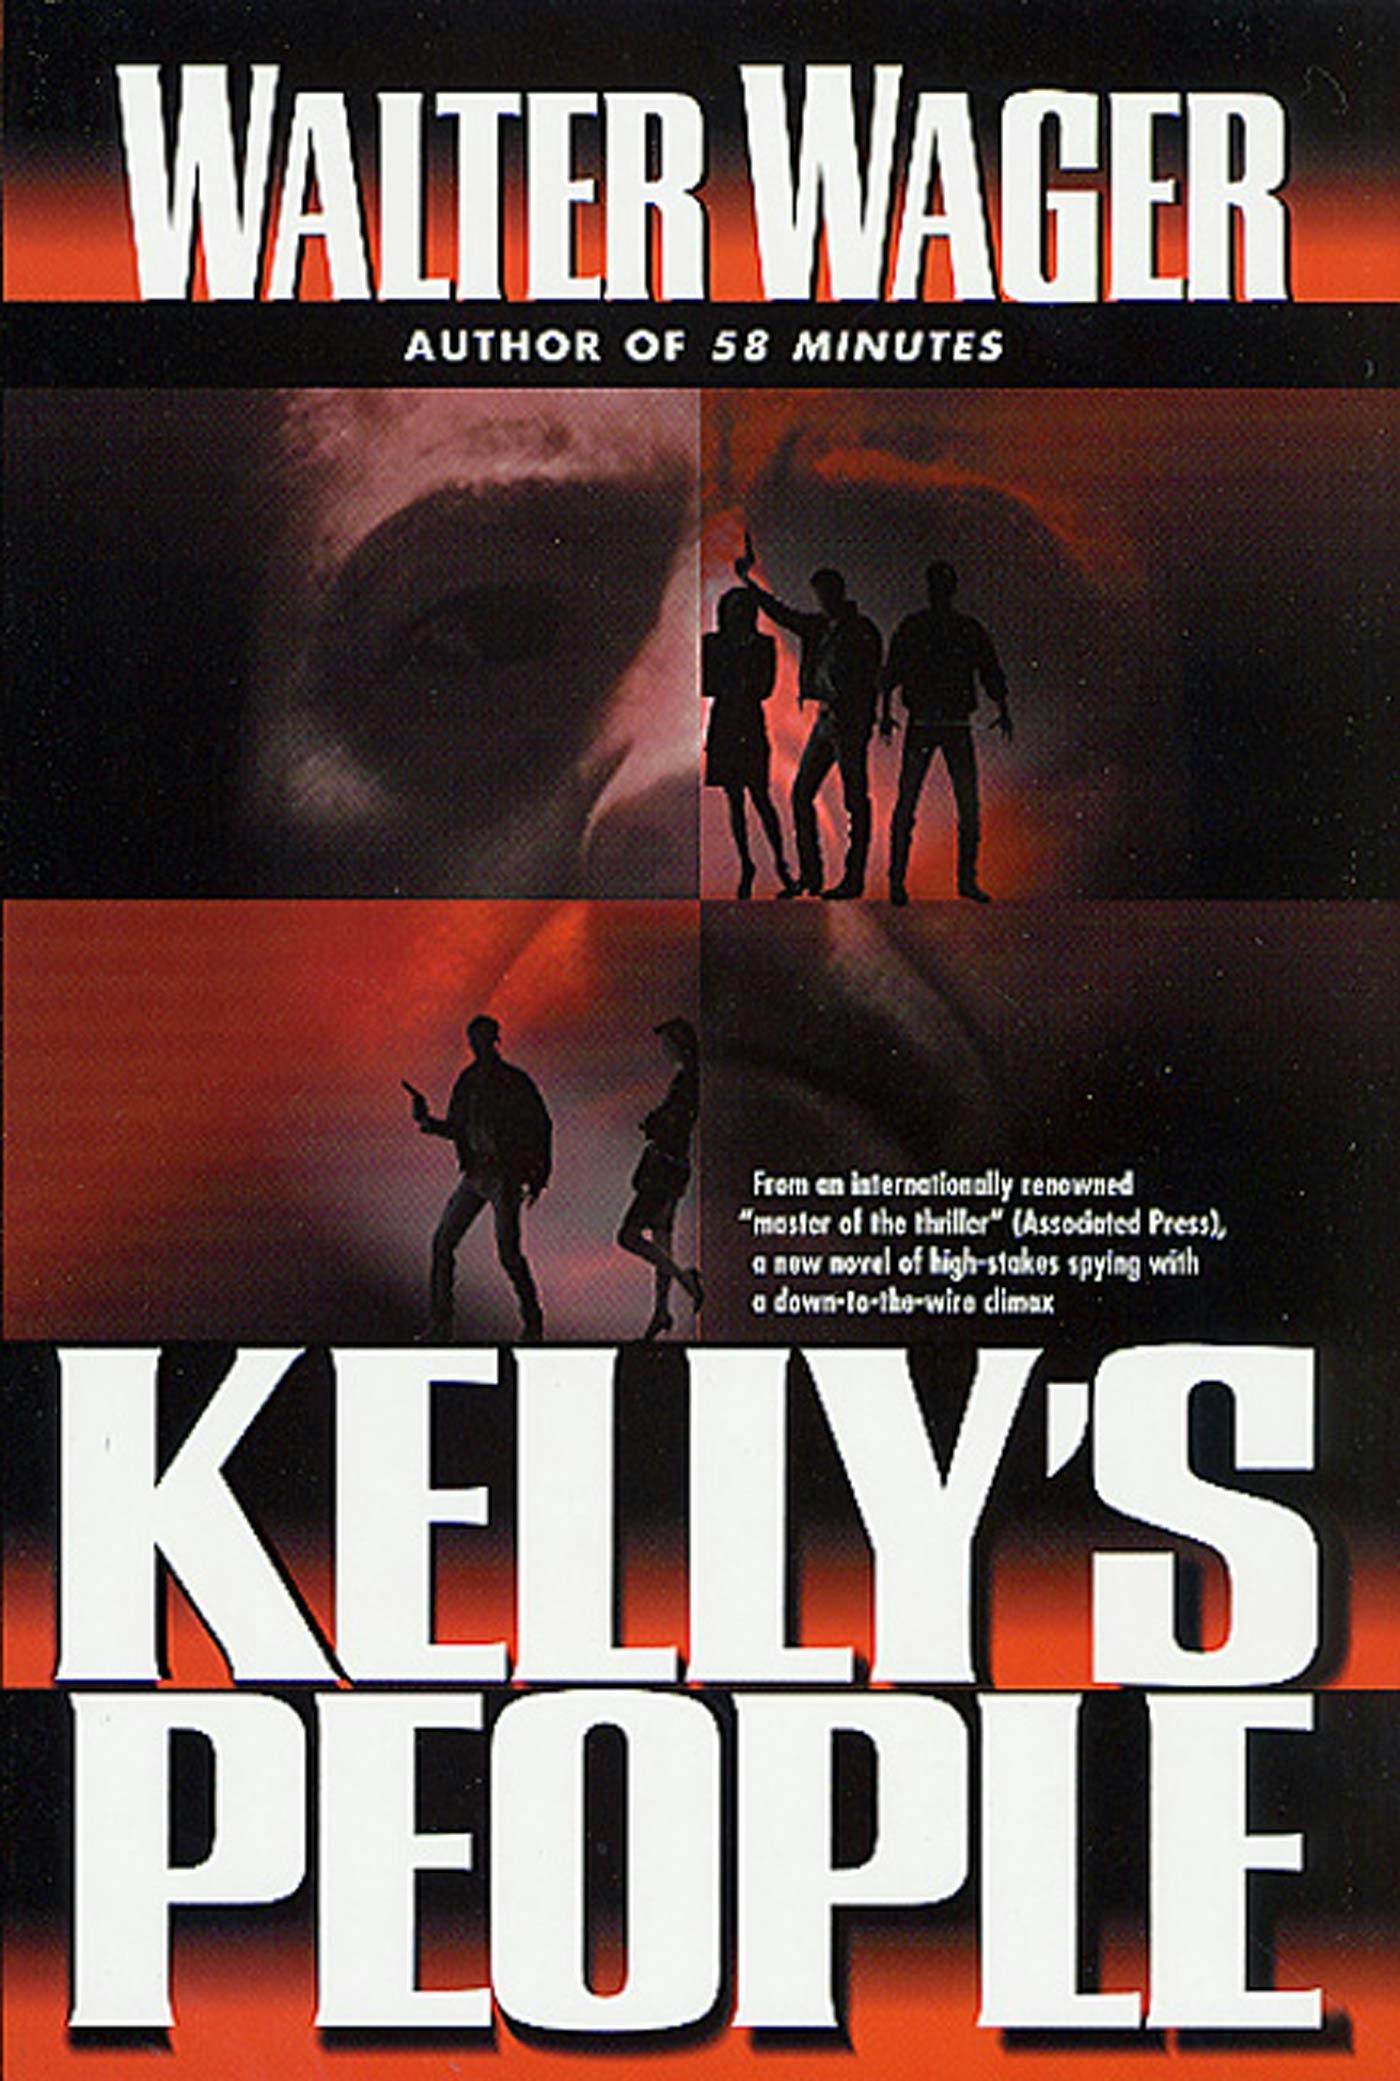 Cover for the book titled as: Kelly's People